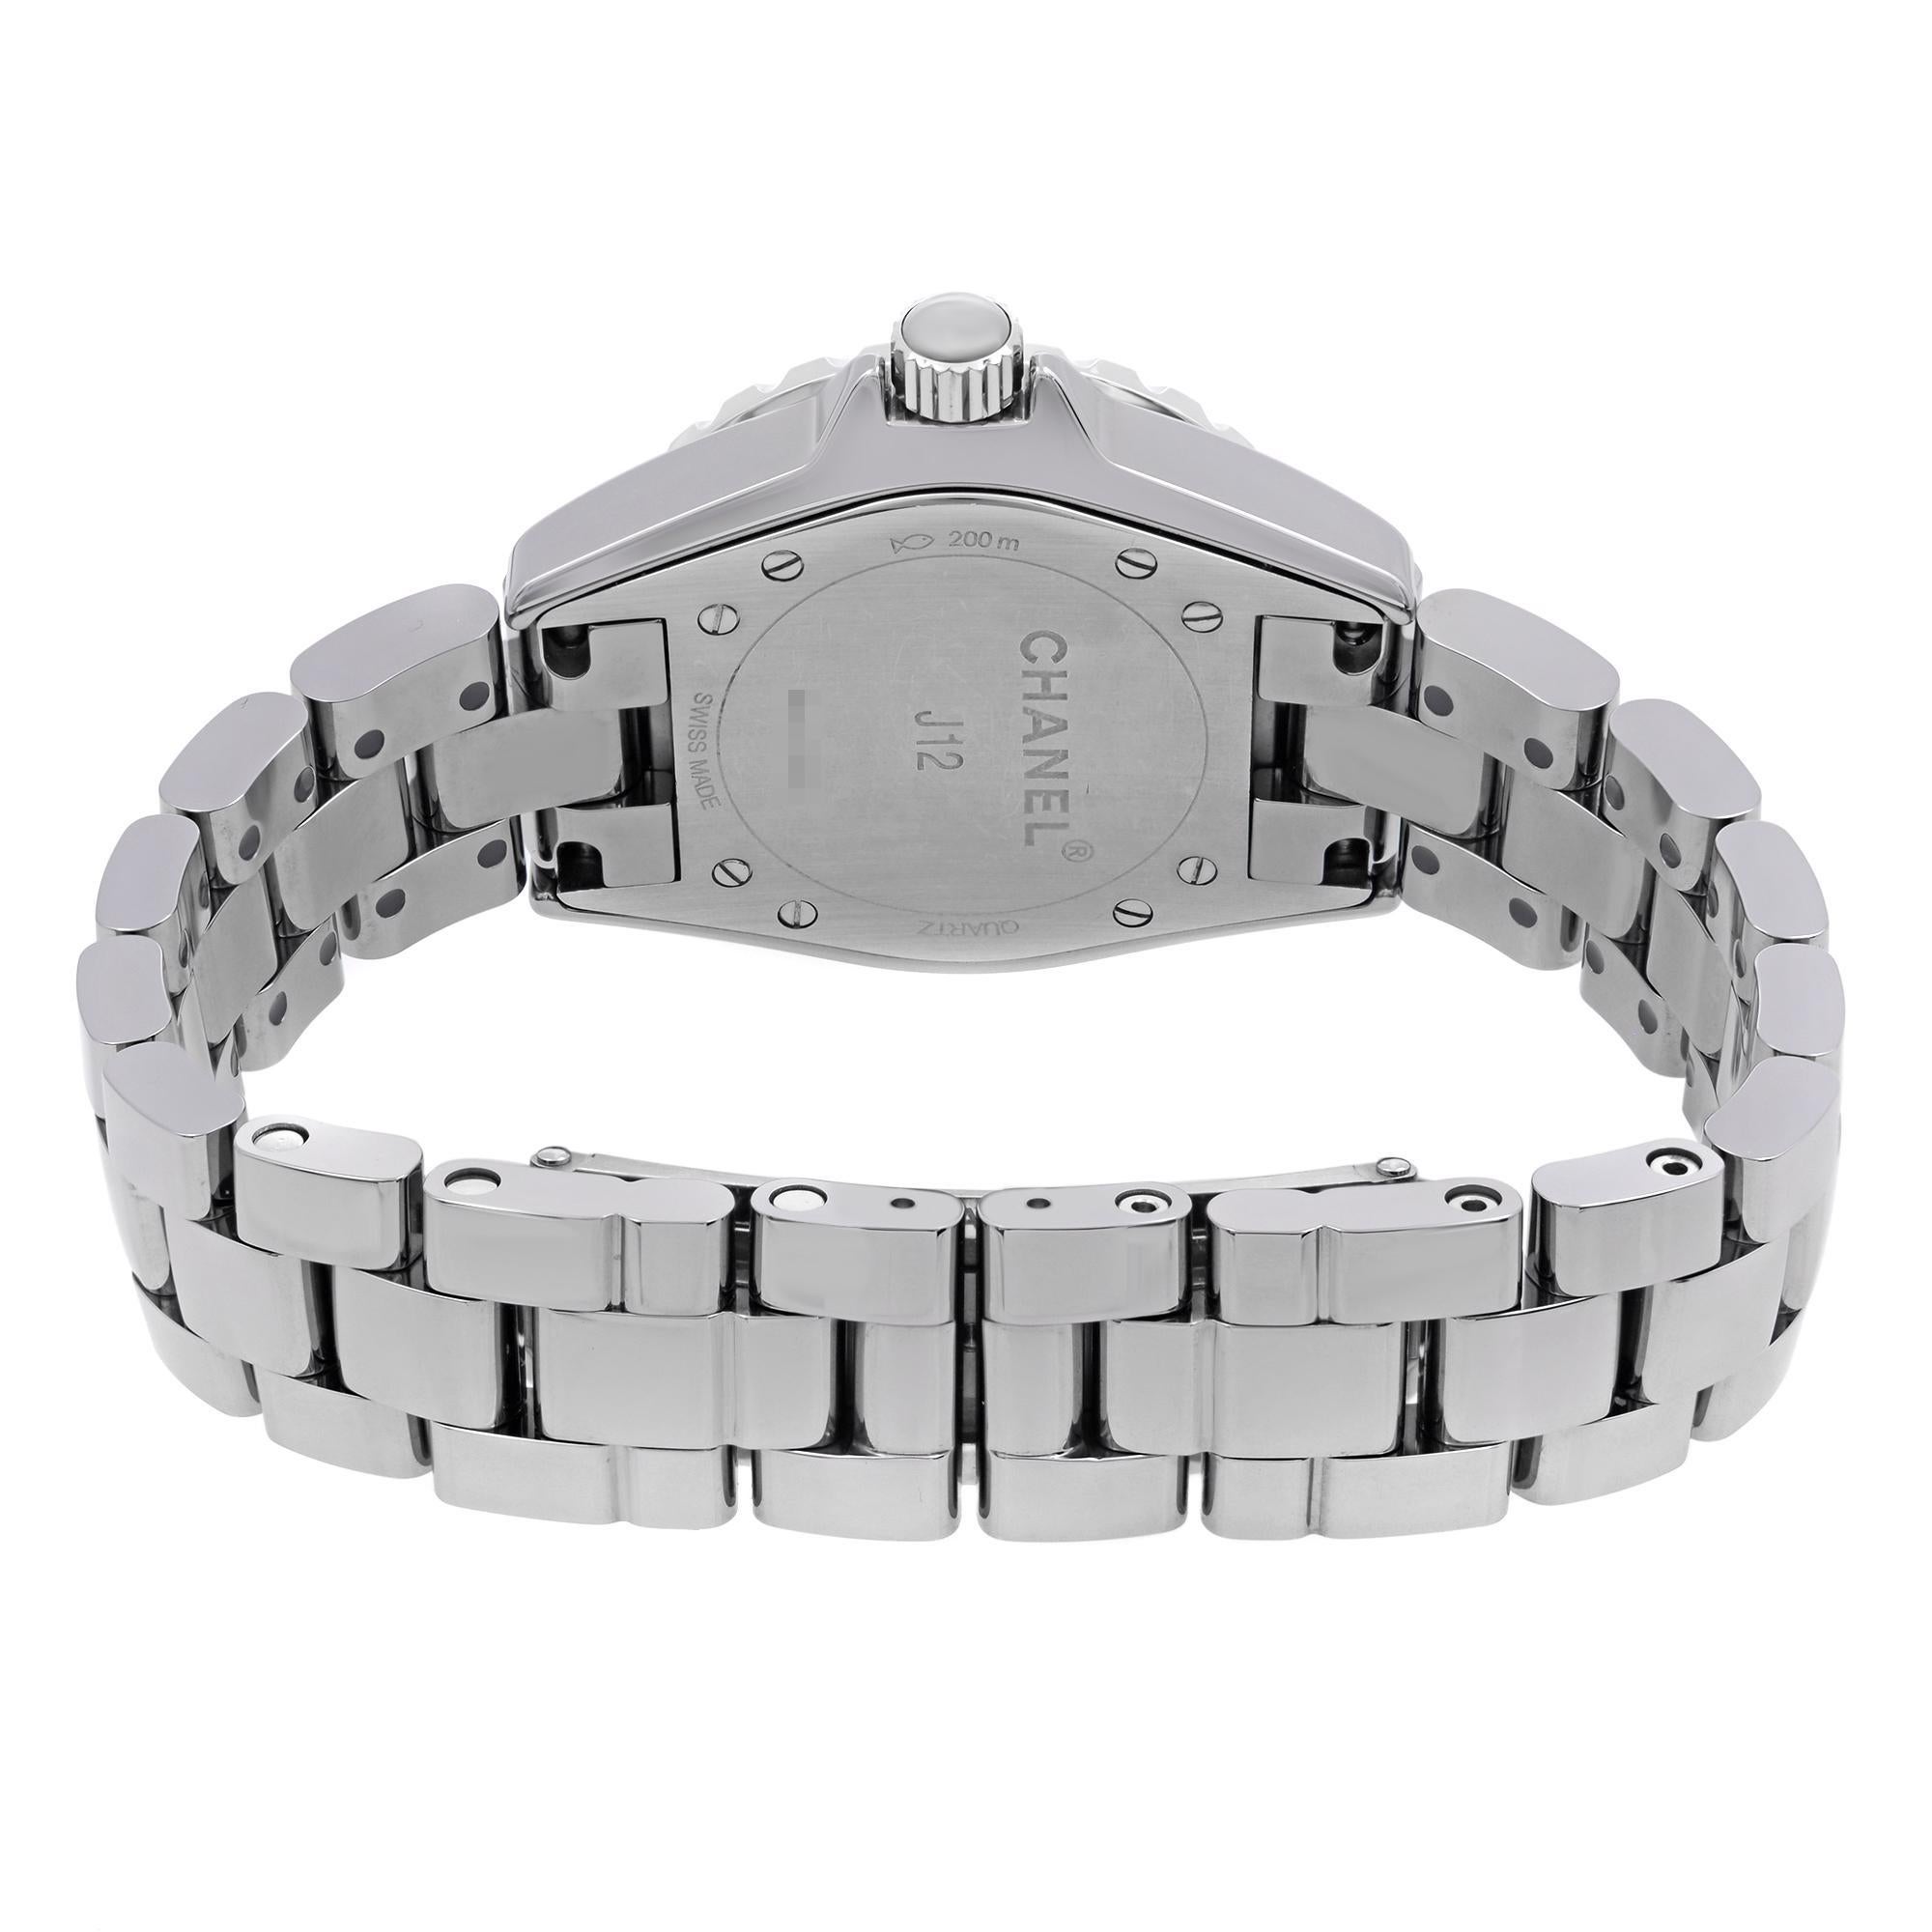 Chanel J12 Chromatic Ceramic Gray Dial Quartz Ladies Watch H2978 In Excellent Condition For Sale In New York, NY